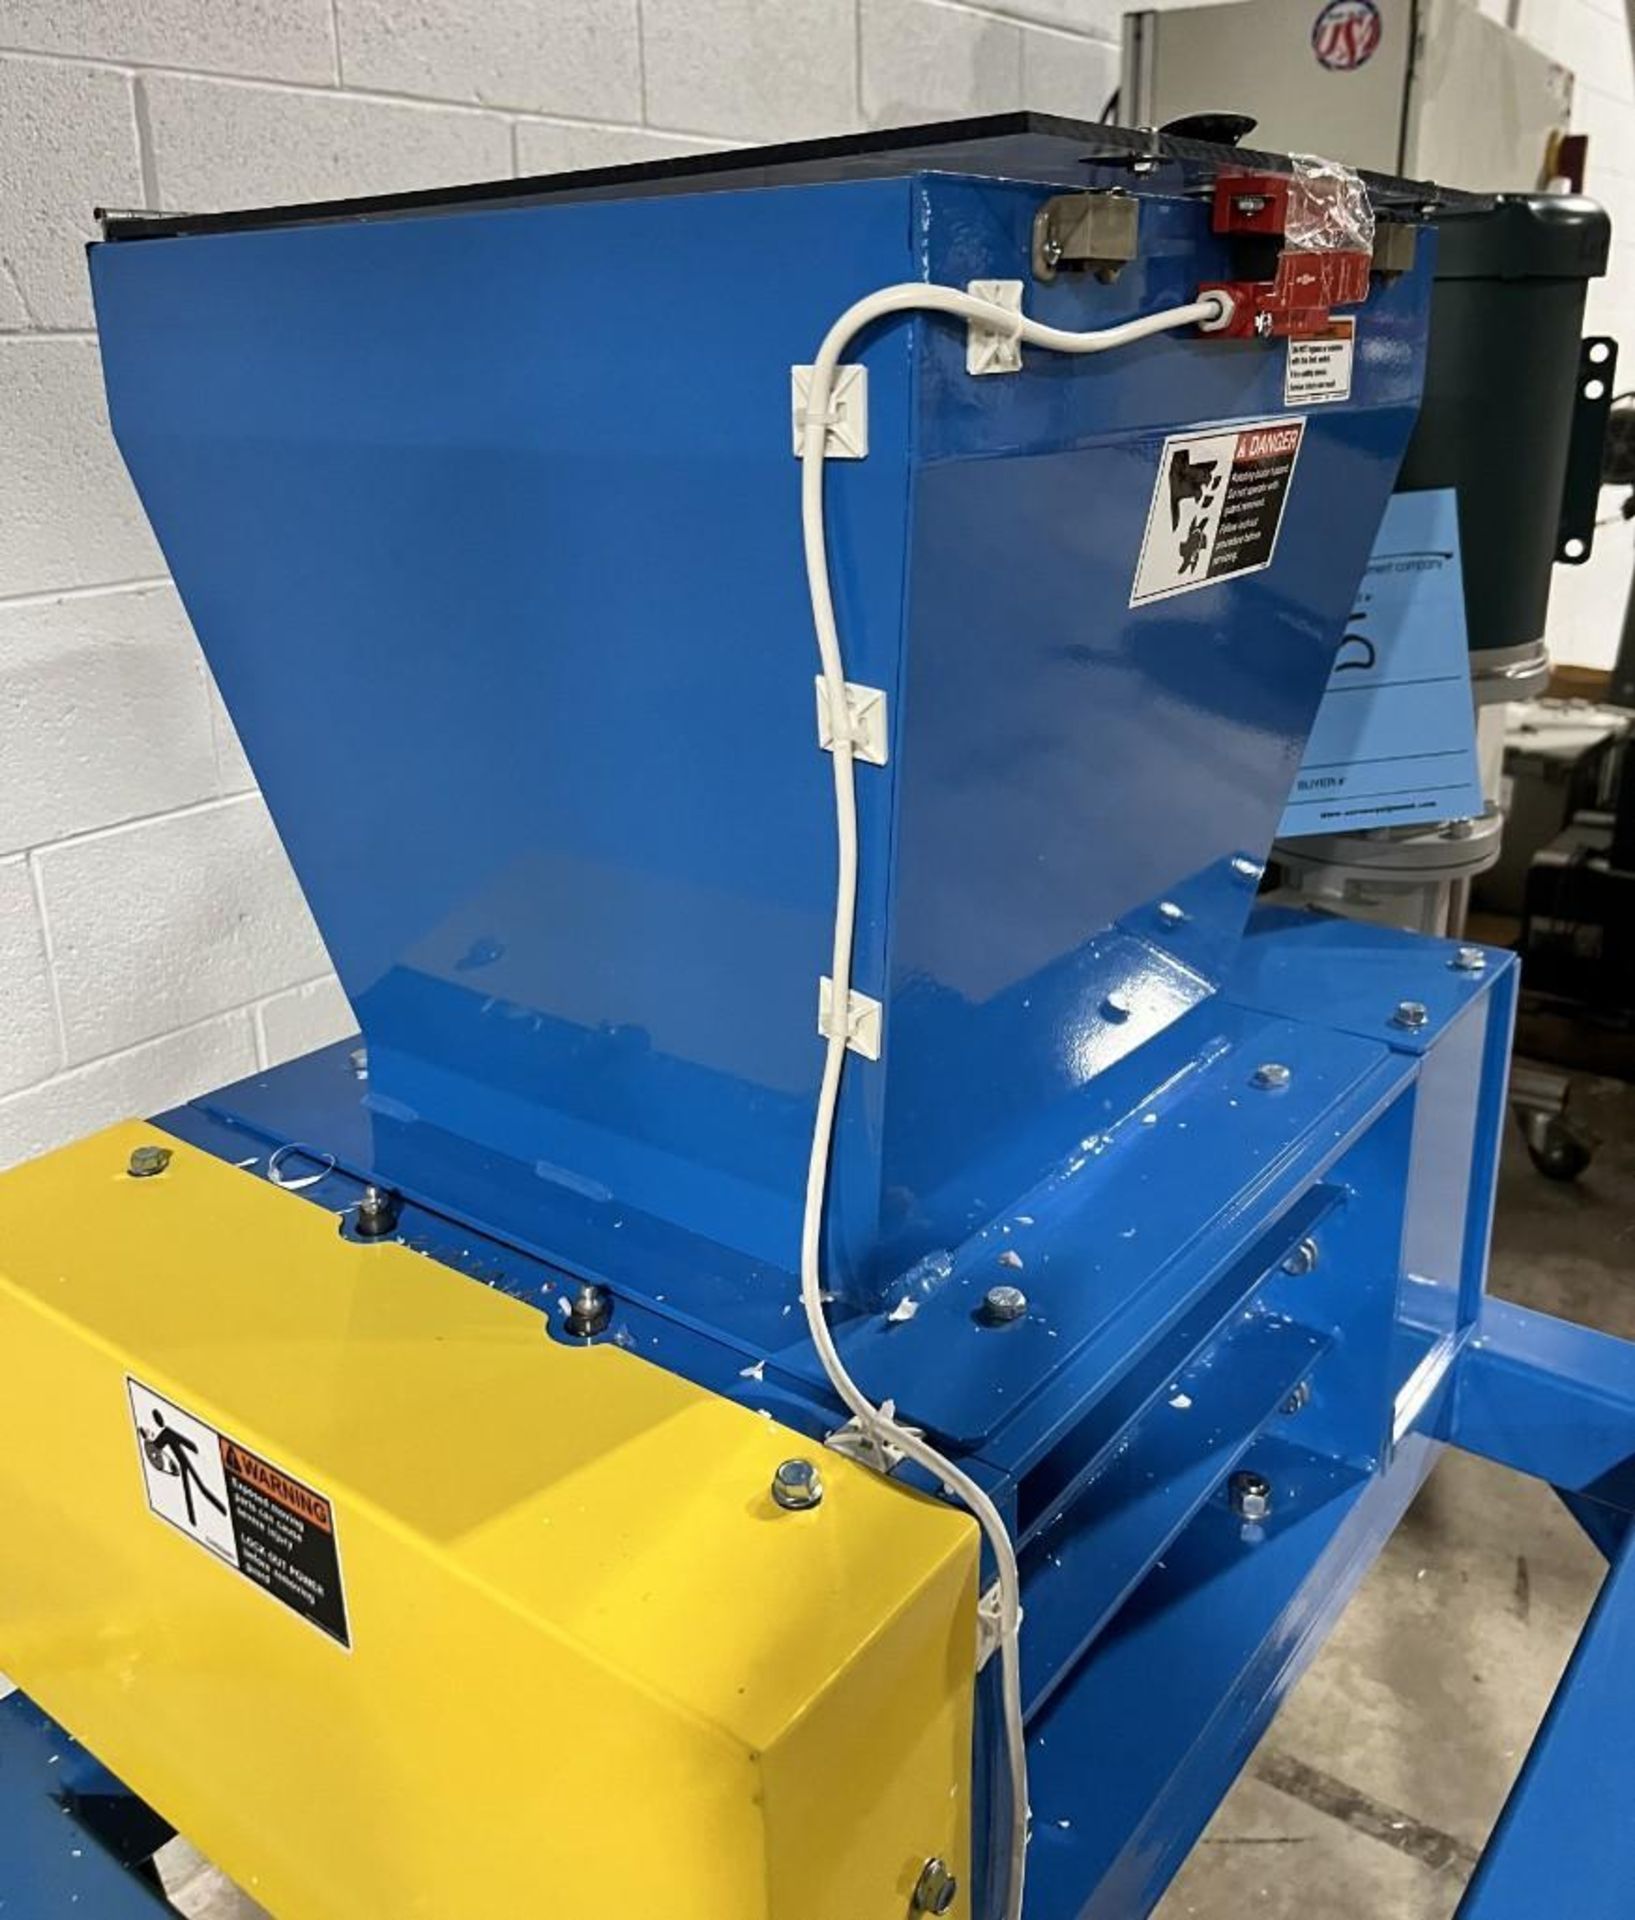 Ameri-Shred Dual Rotor Shredder, Model MWS-21003, Serial# 37197. With approximate 12" x 12" feed wit - Image 5 of 15